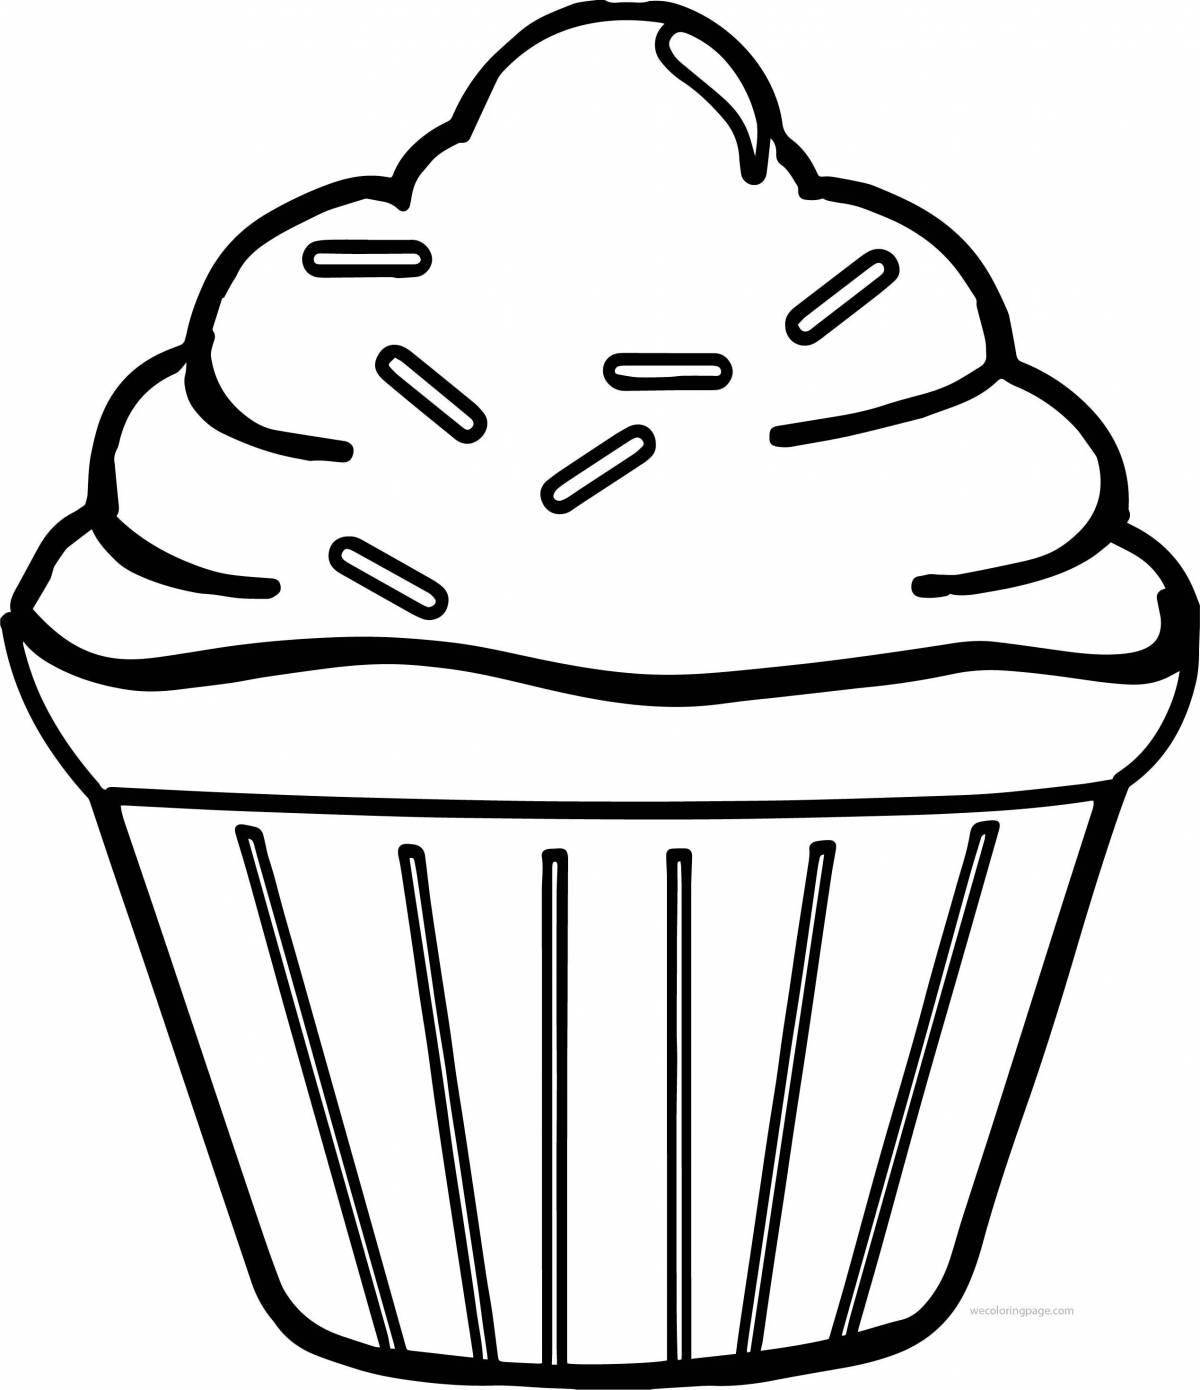 Bright cupcake coloring page